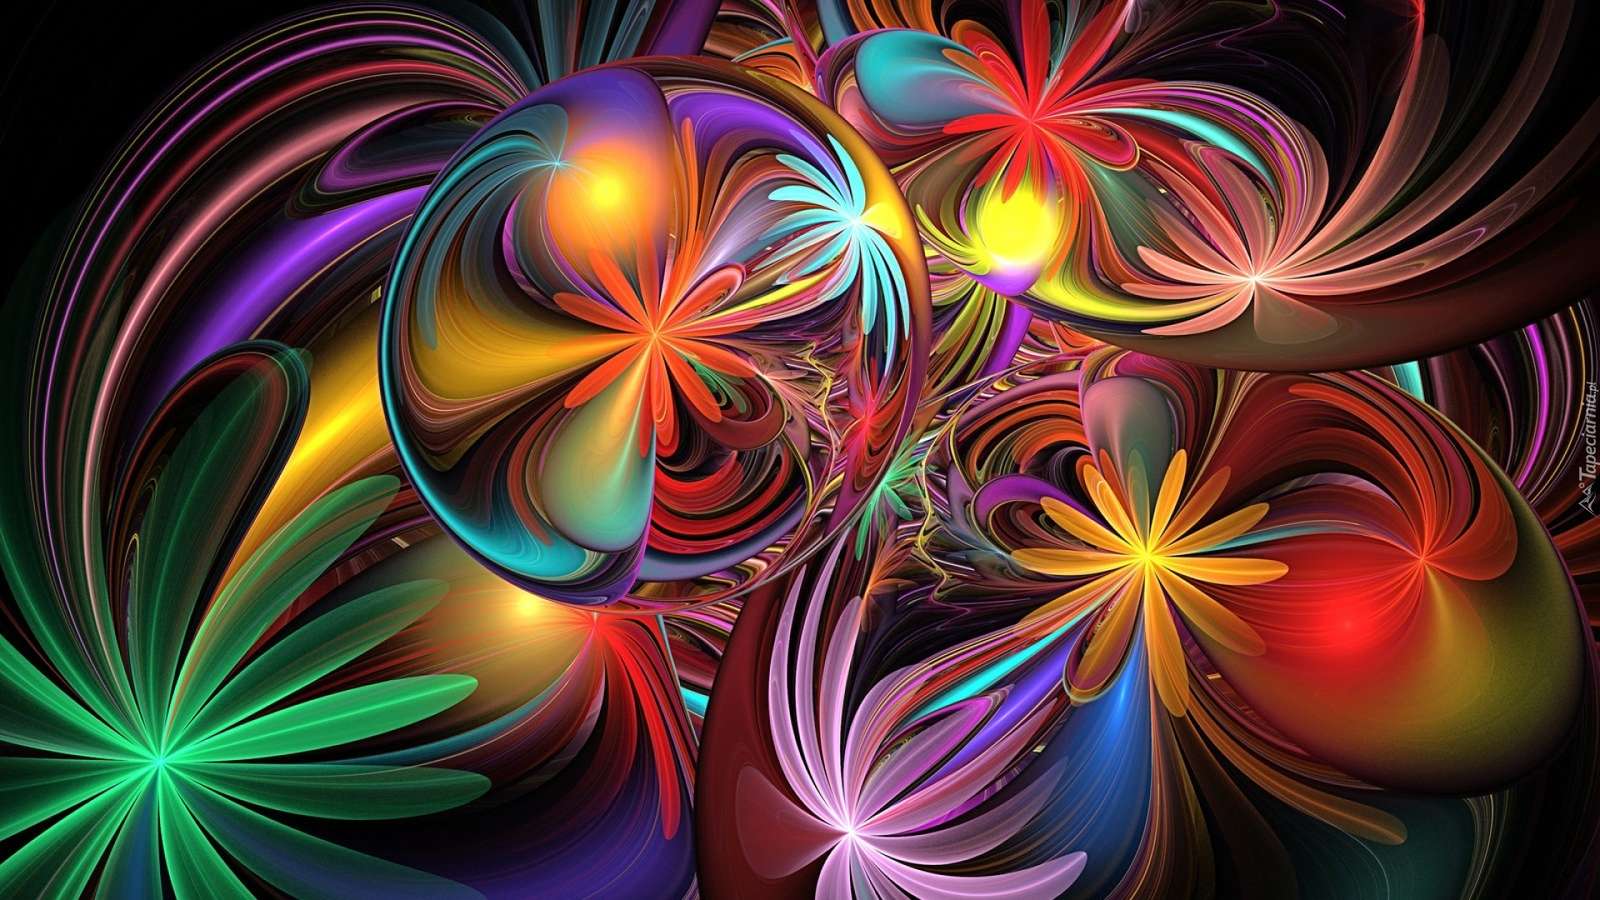 Abstraction of colorful flower online puzzle